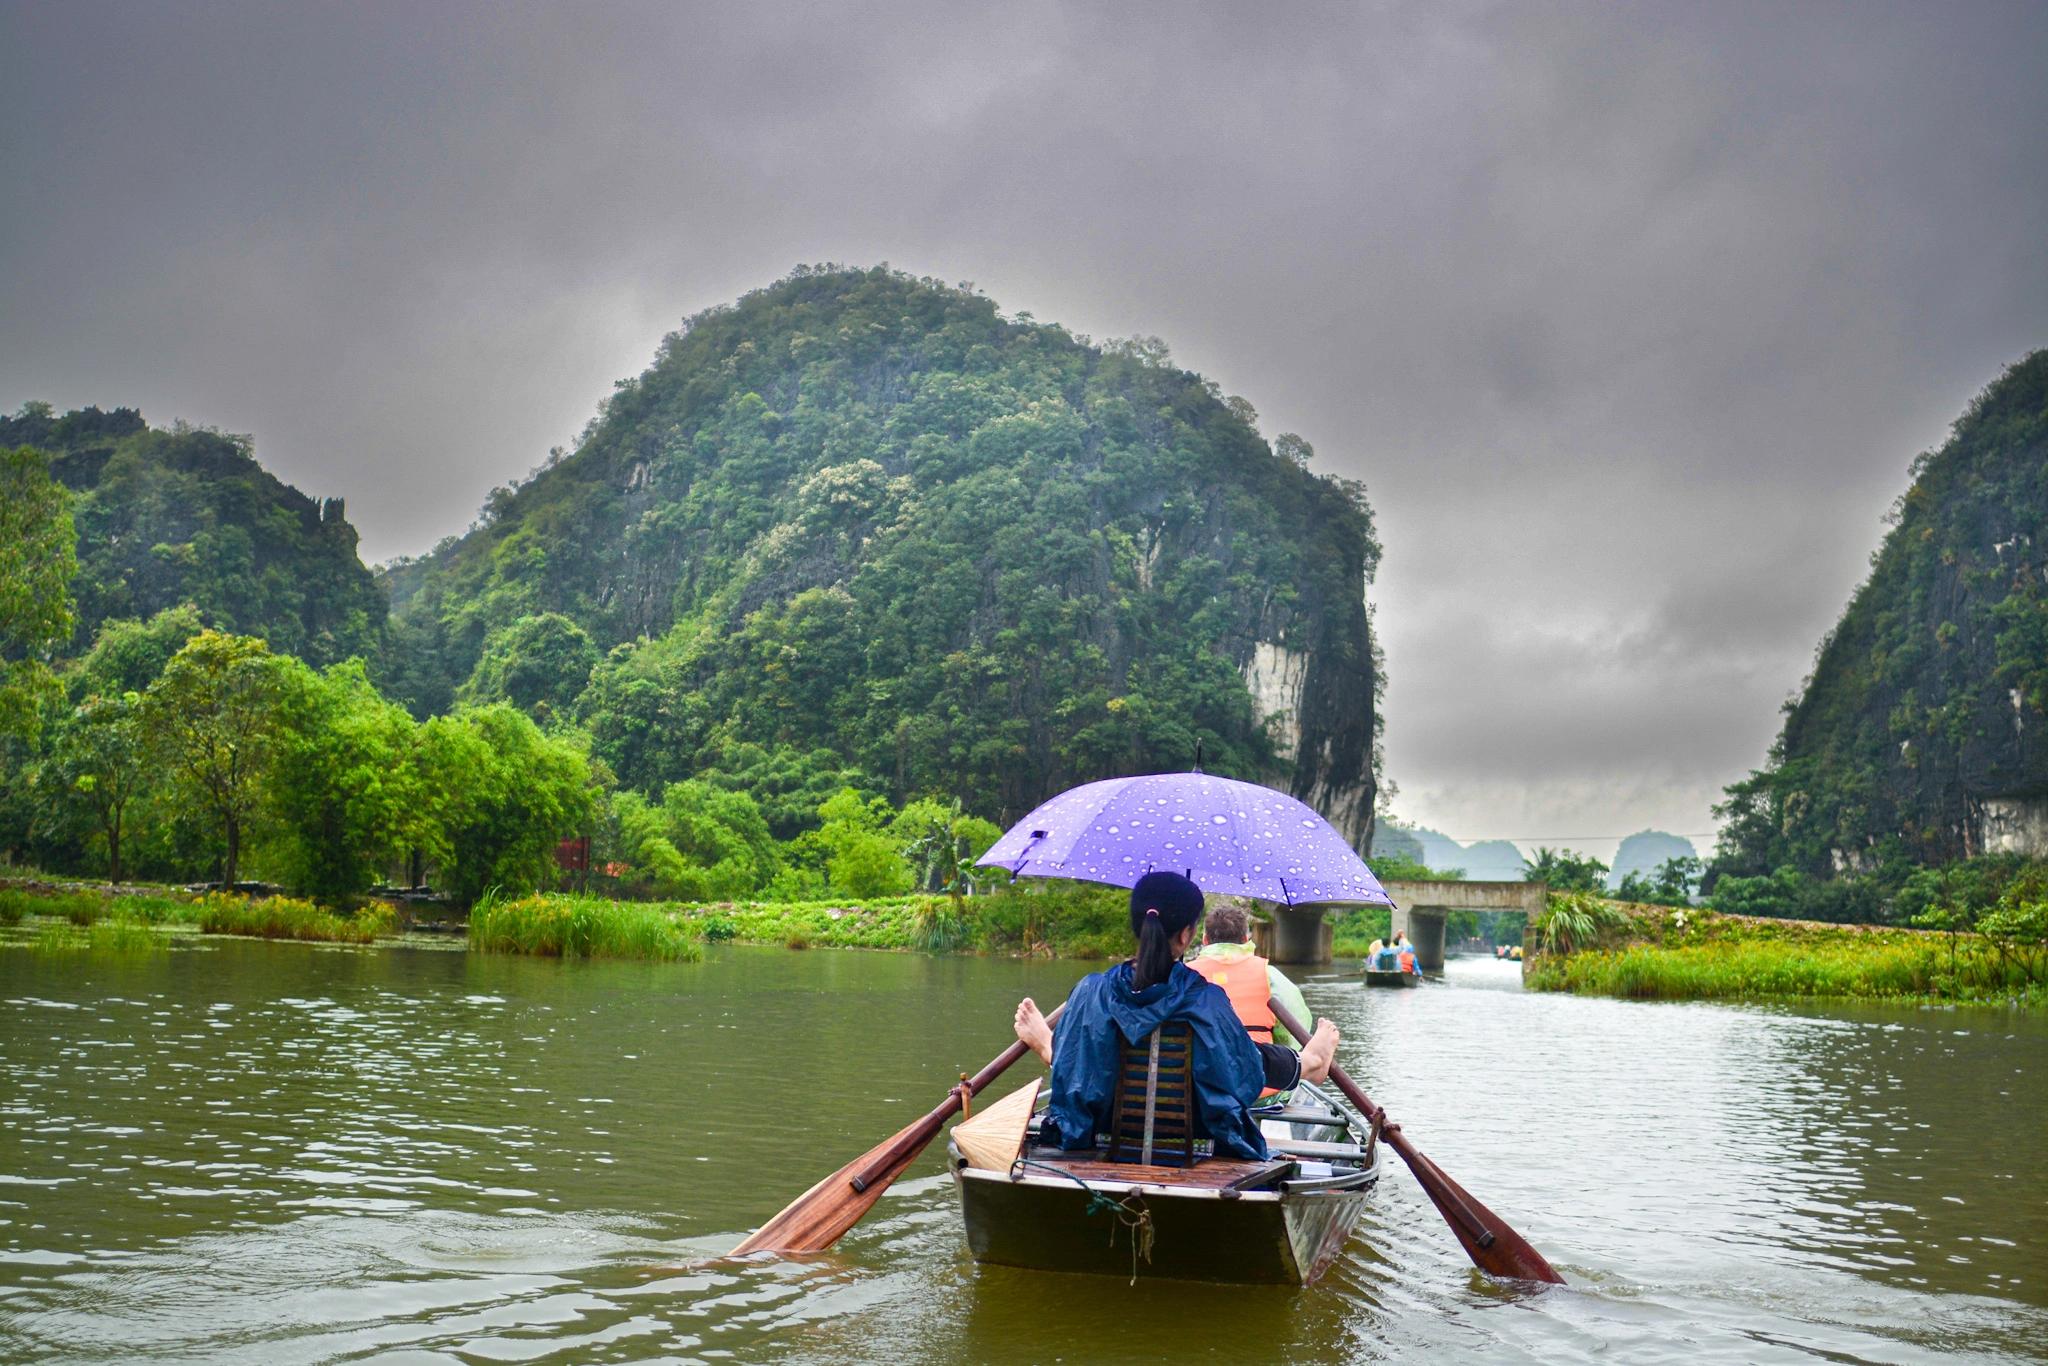 A perfect rainy day while floating down through Ngo Dong River